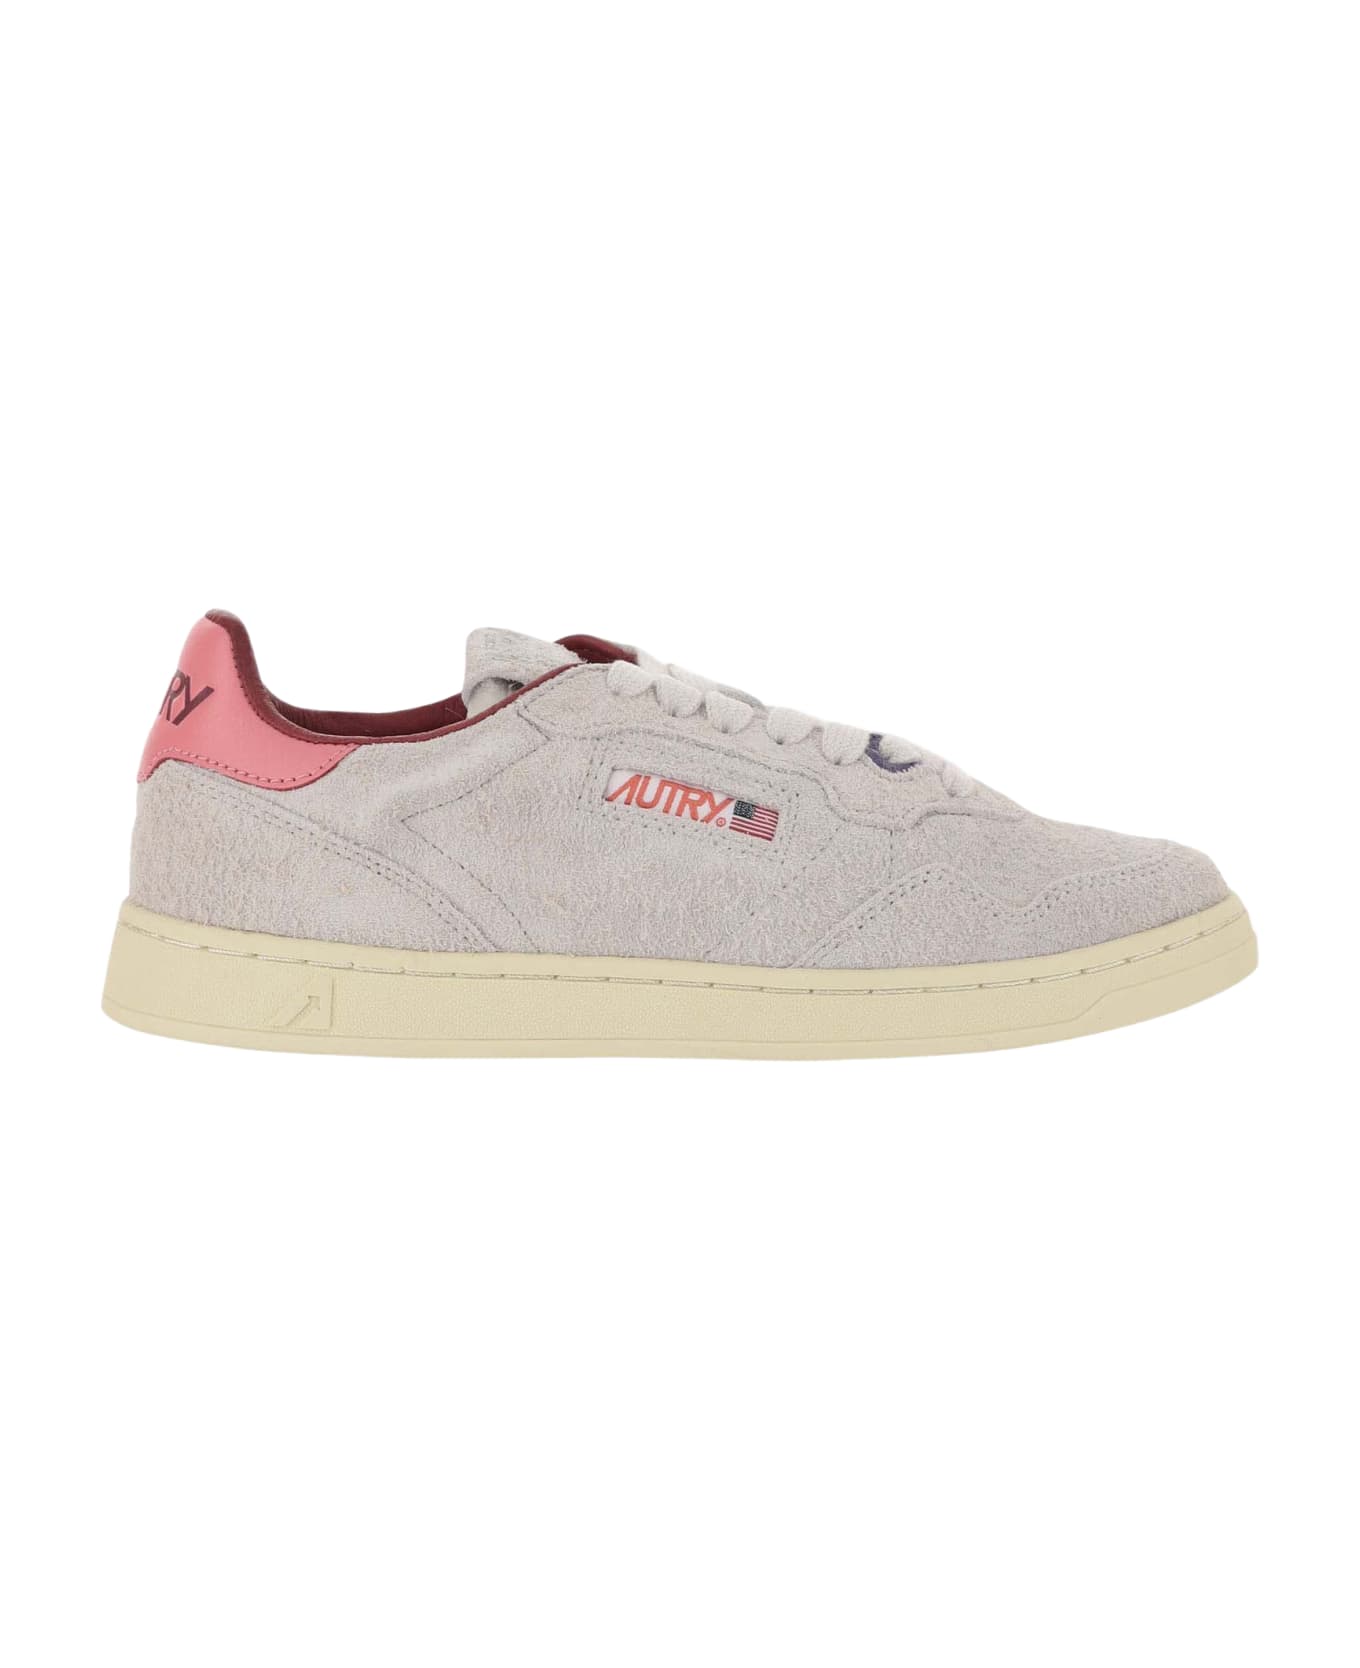 Autry Medalist Low Sneakers In Suede Hair Sand Effect - Grey スニーカー